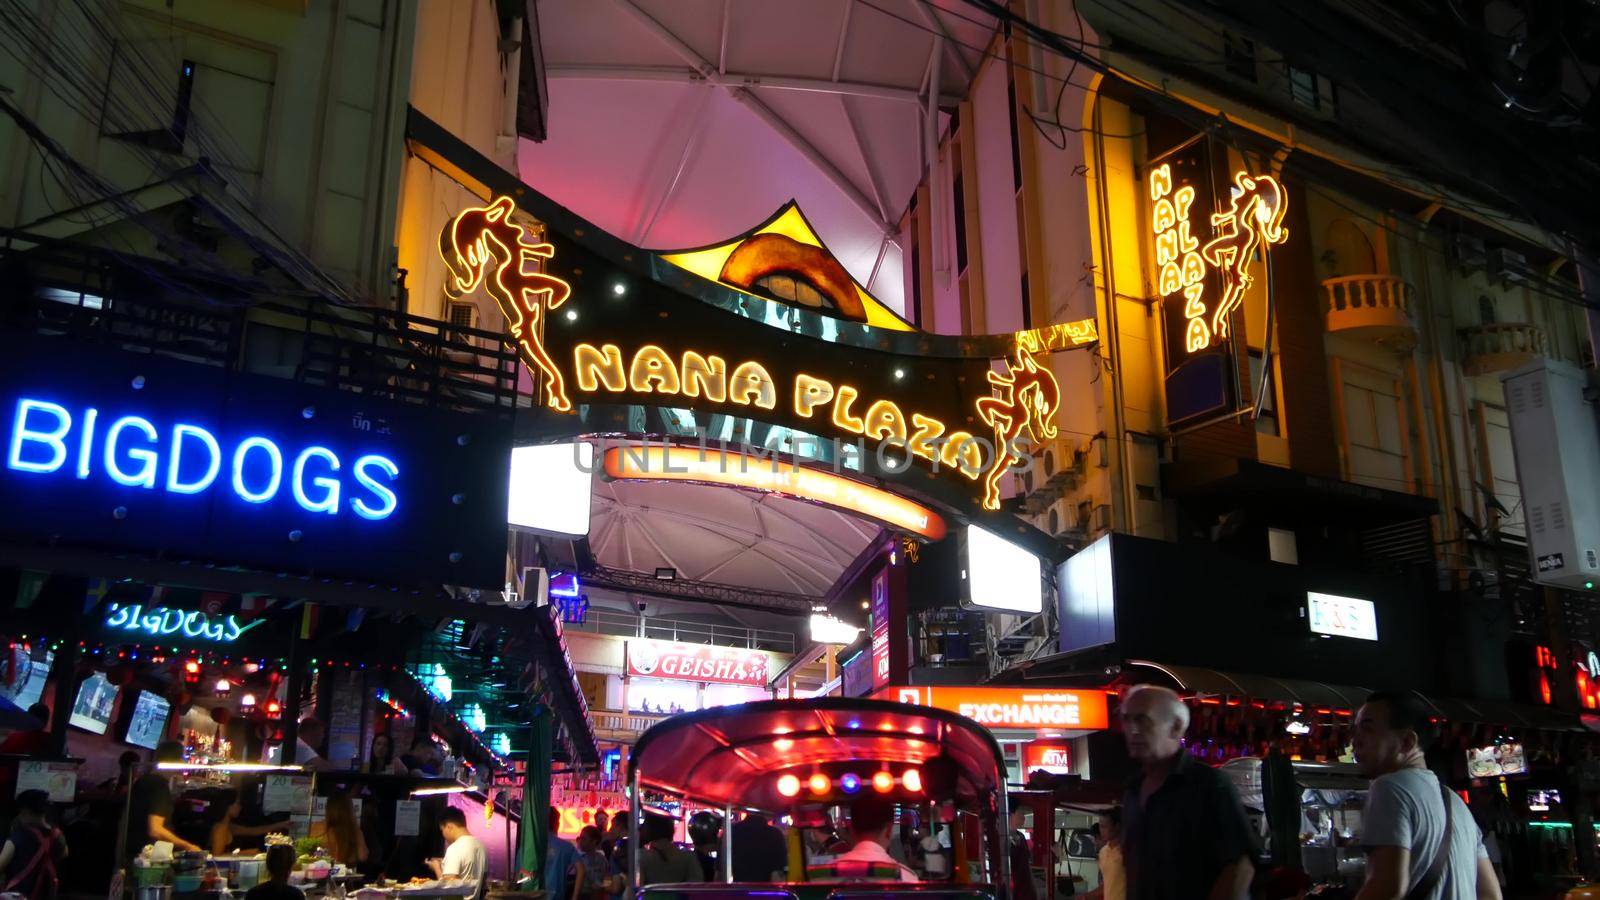 BANGKOK, THAILAND,13 JULY 2019 Vivid neon sign glowing, Nana Plaza street. Nightlife in erotic Red light district soi. Illuminated bar and adult go-go show club. Night life tourist entertainment by DogoraSun